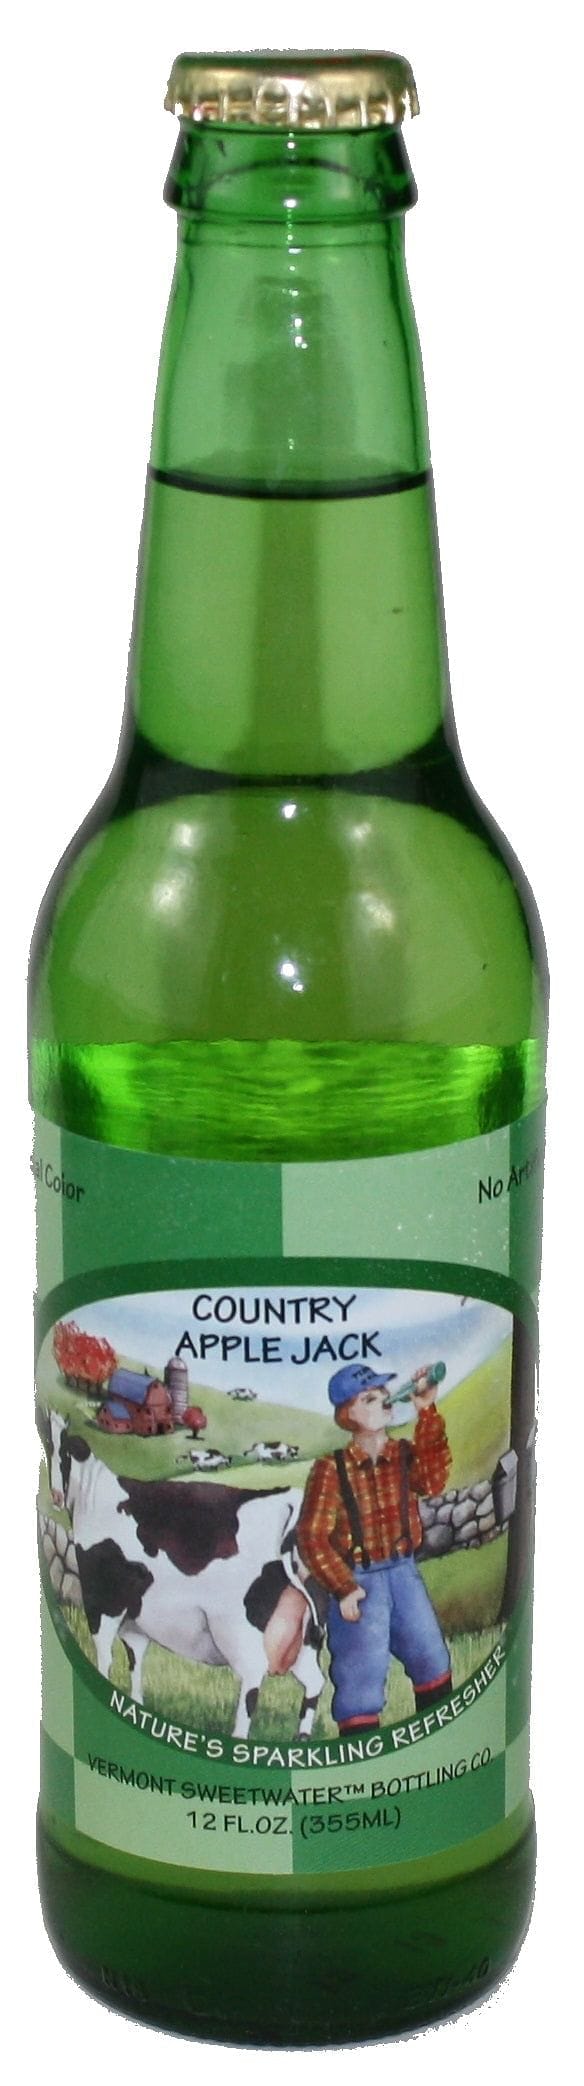 Vermont Sweetwater All Natural Glass Bottle Soda (Country Apple Jack) - Shelburne Country Store